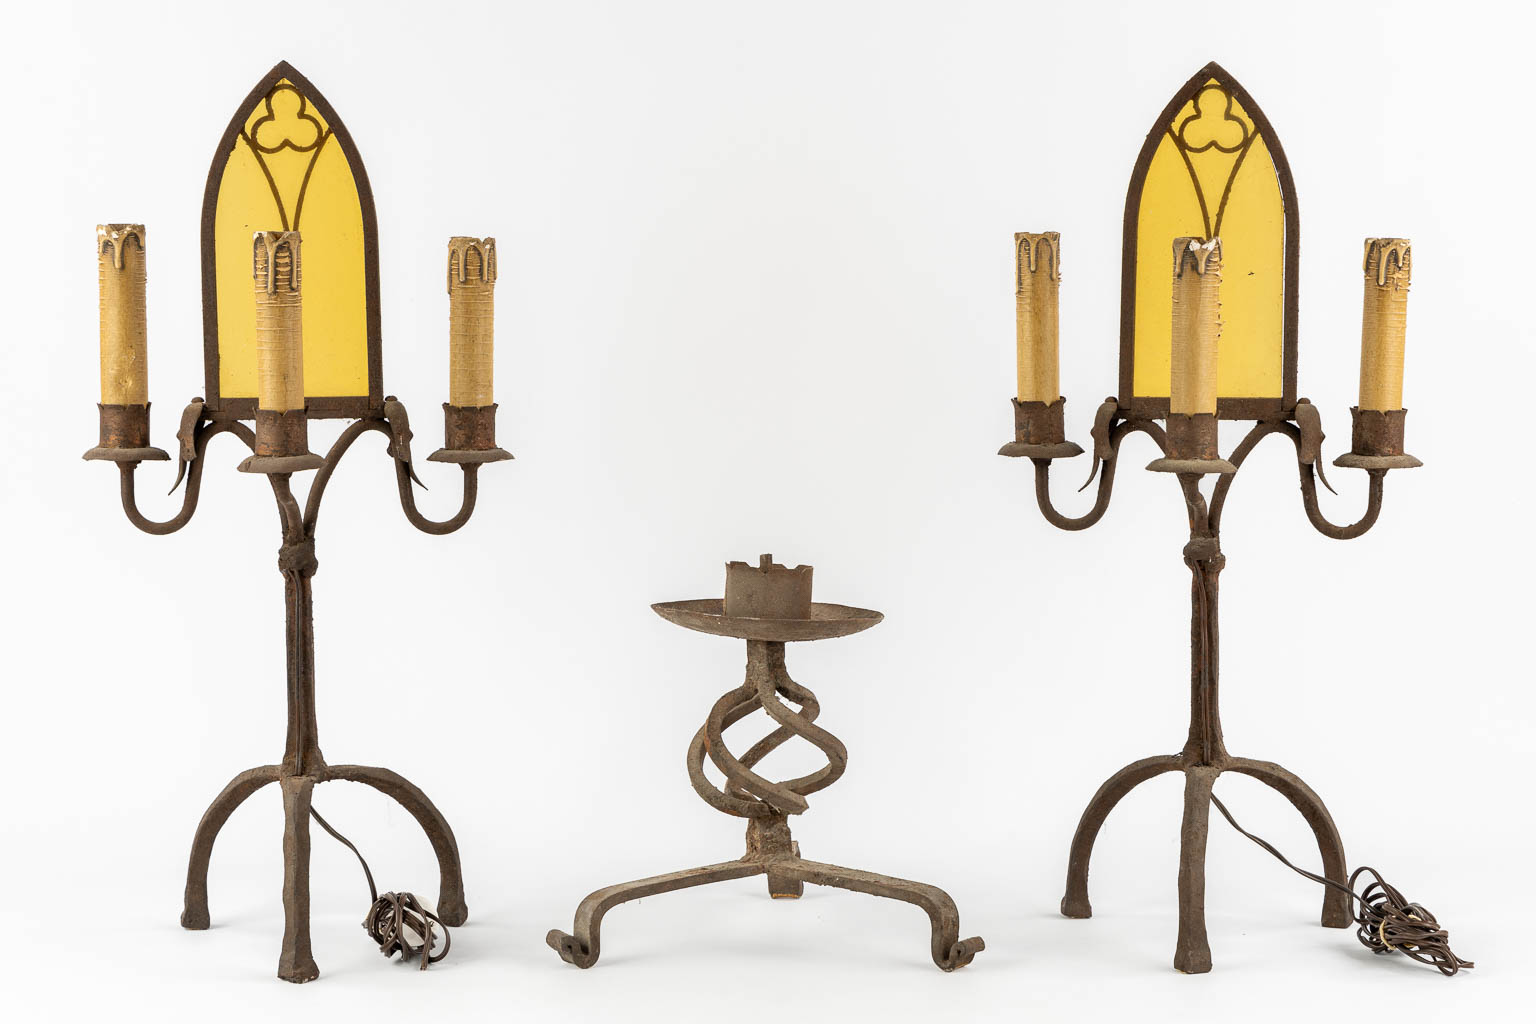 A pair of wrought iron table lamps in a Gothic Revival style. Added a candlestick. (H:63 cm) - Image 5 of 9